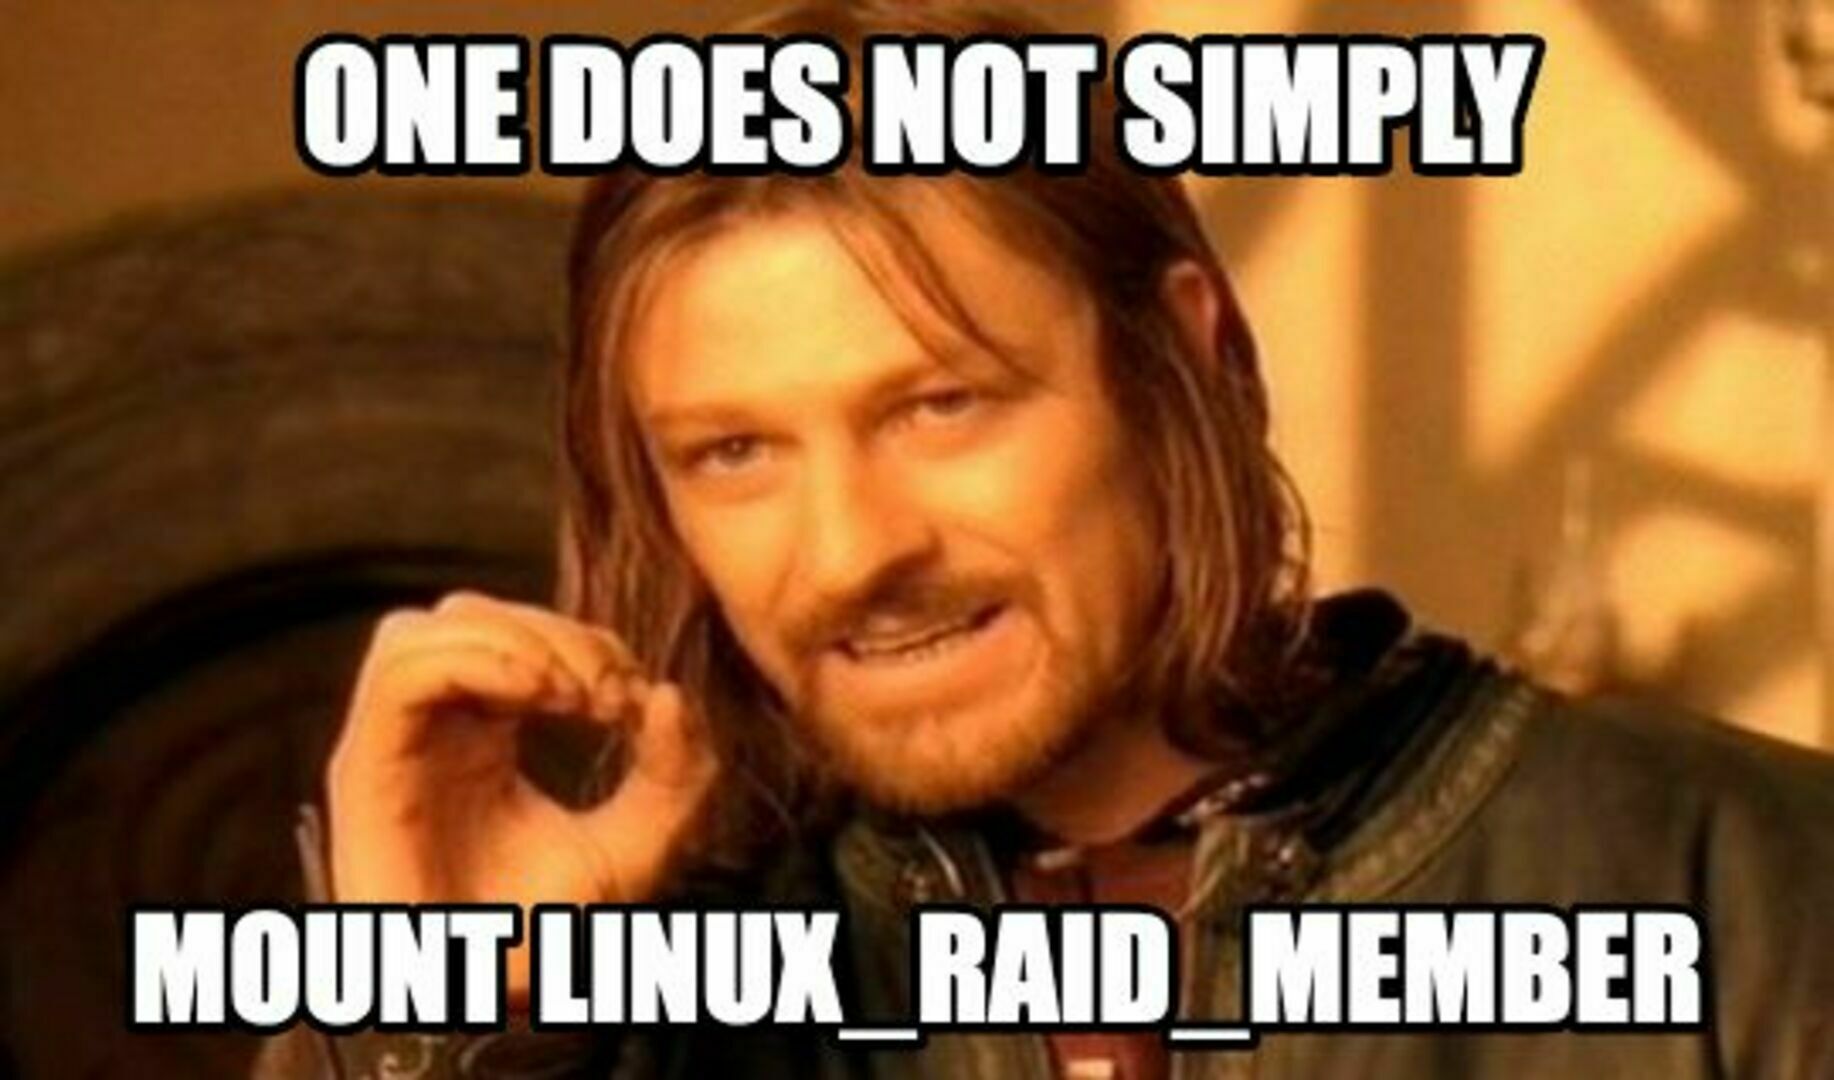 https://myrtana.sk/media/articles:how-to-modify-existing-software-raid1-md/images/1534742_1080.jpg